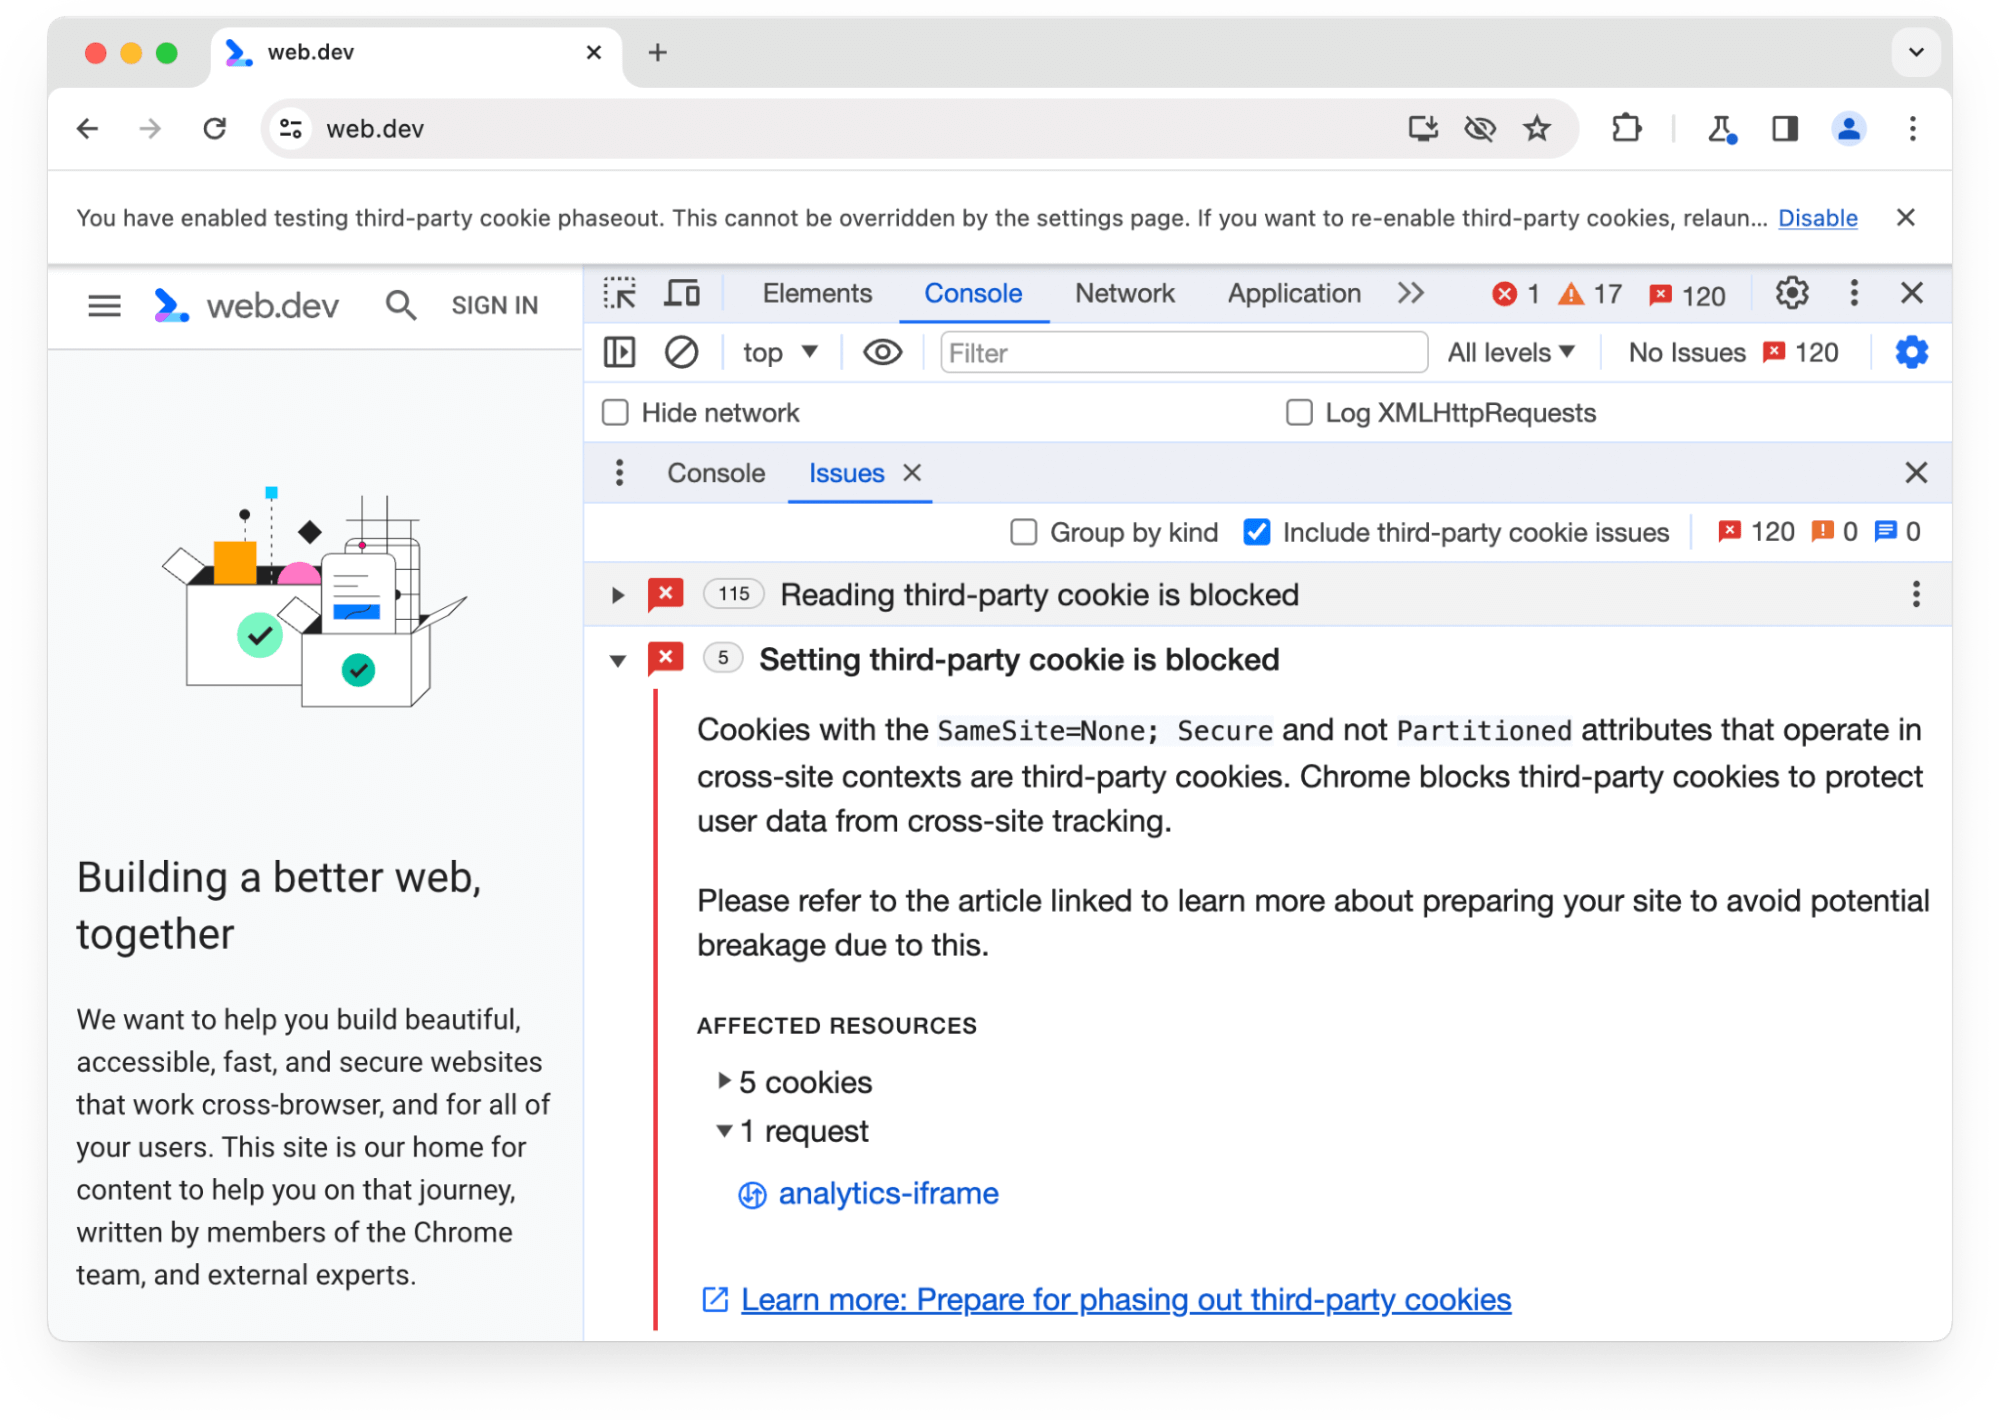 Chrome DevTools Issues panel warning about 5 third-party cookies that have been blocked for 1 request.